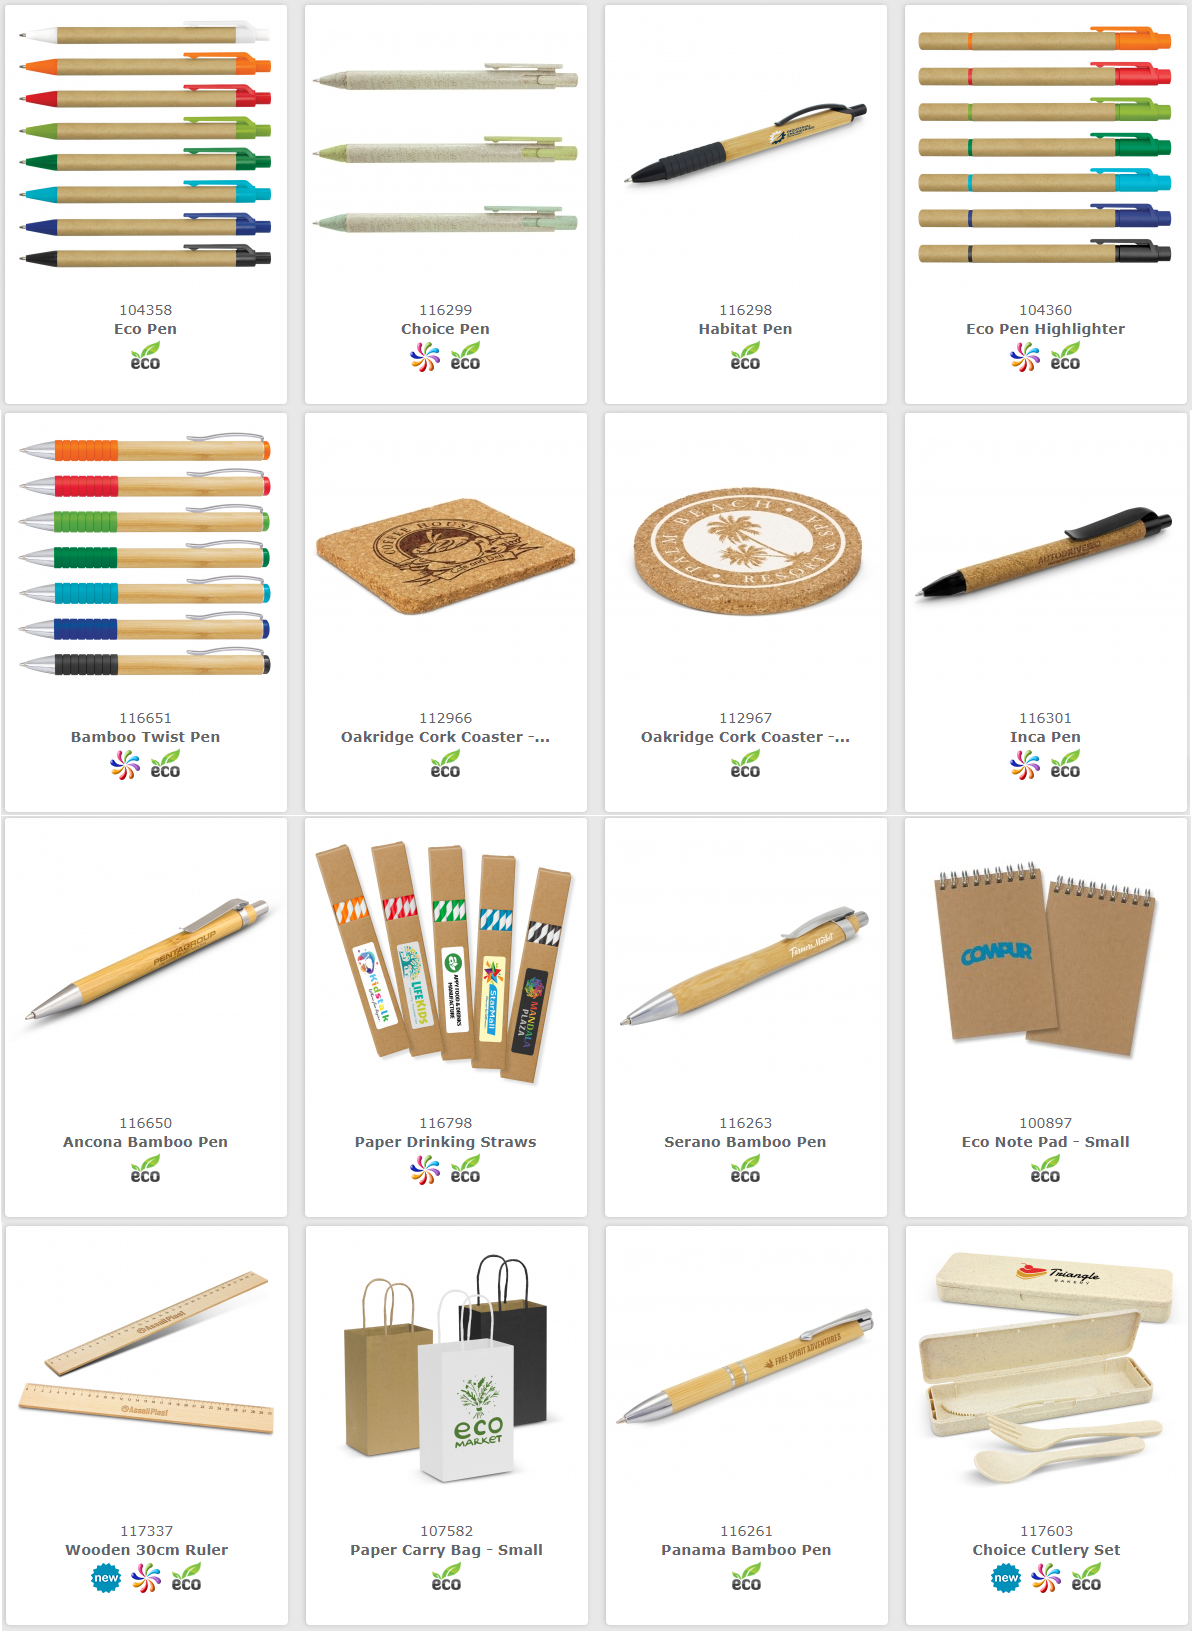 eco environmentally friendly promotional products